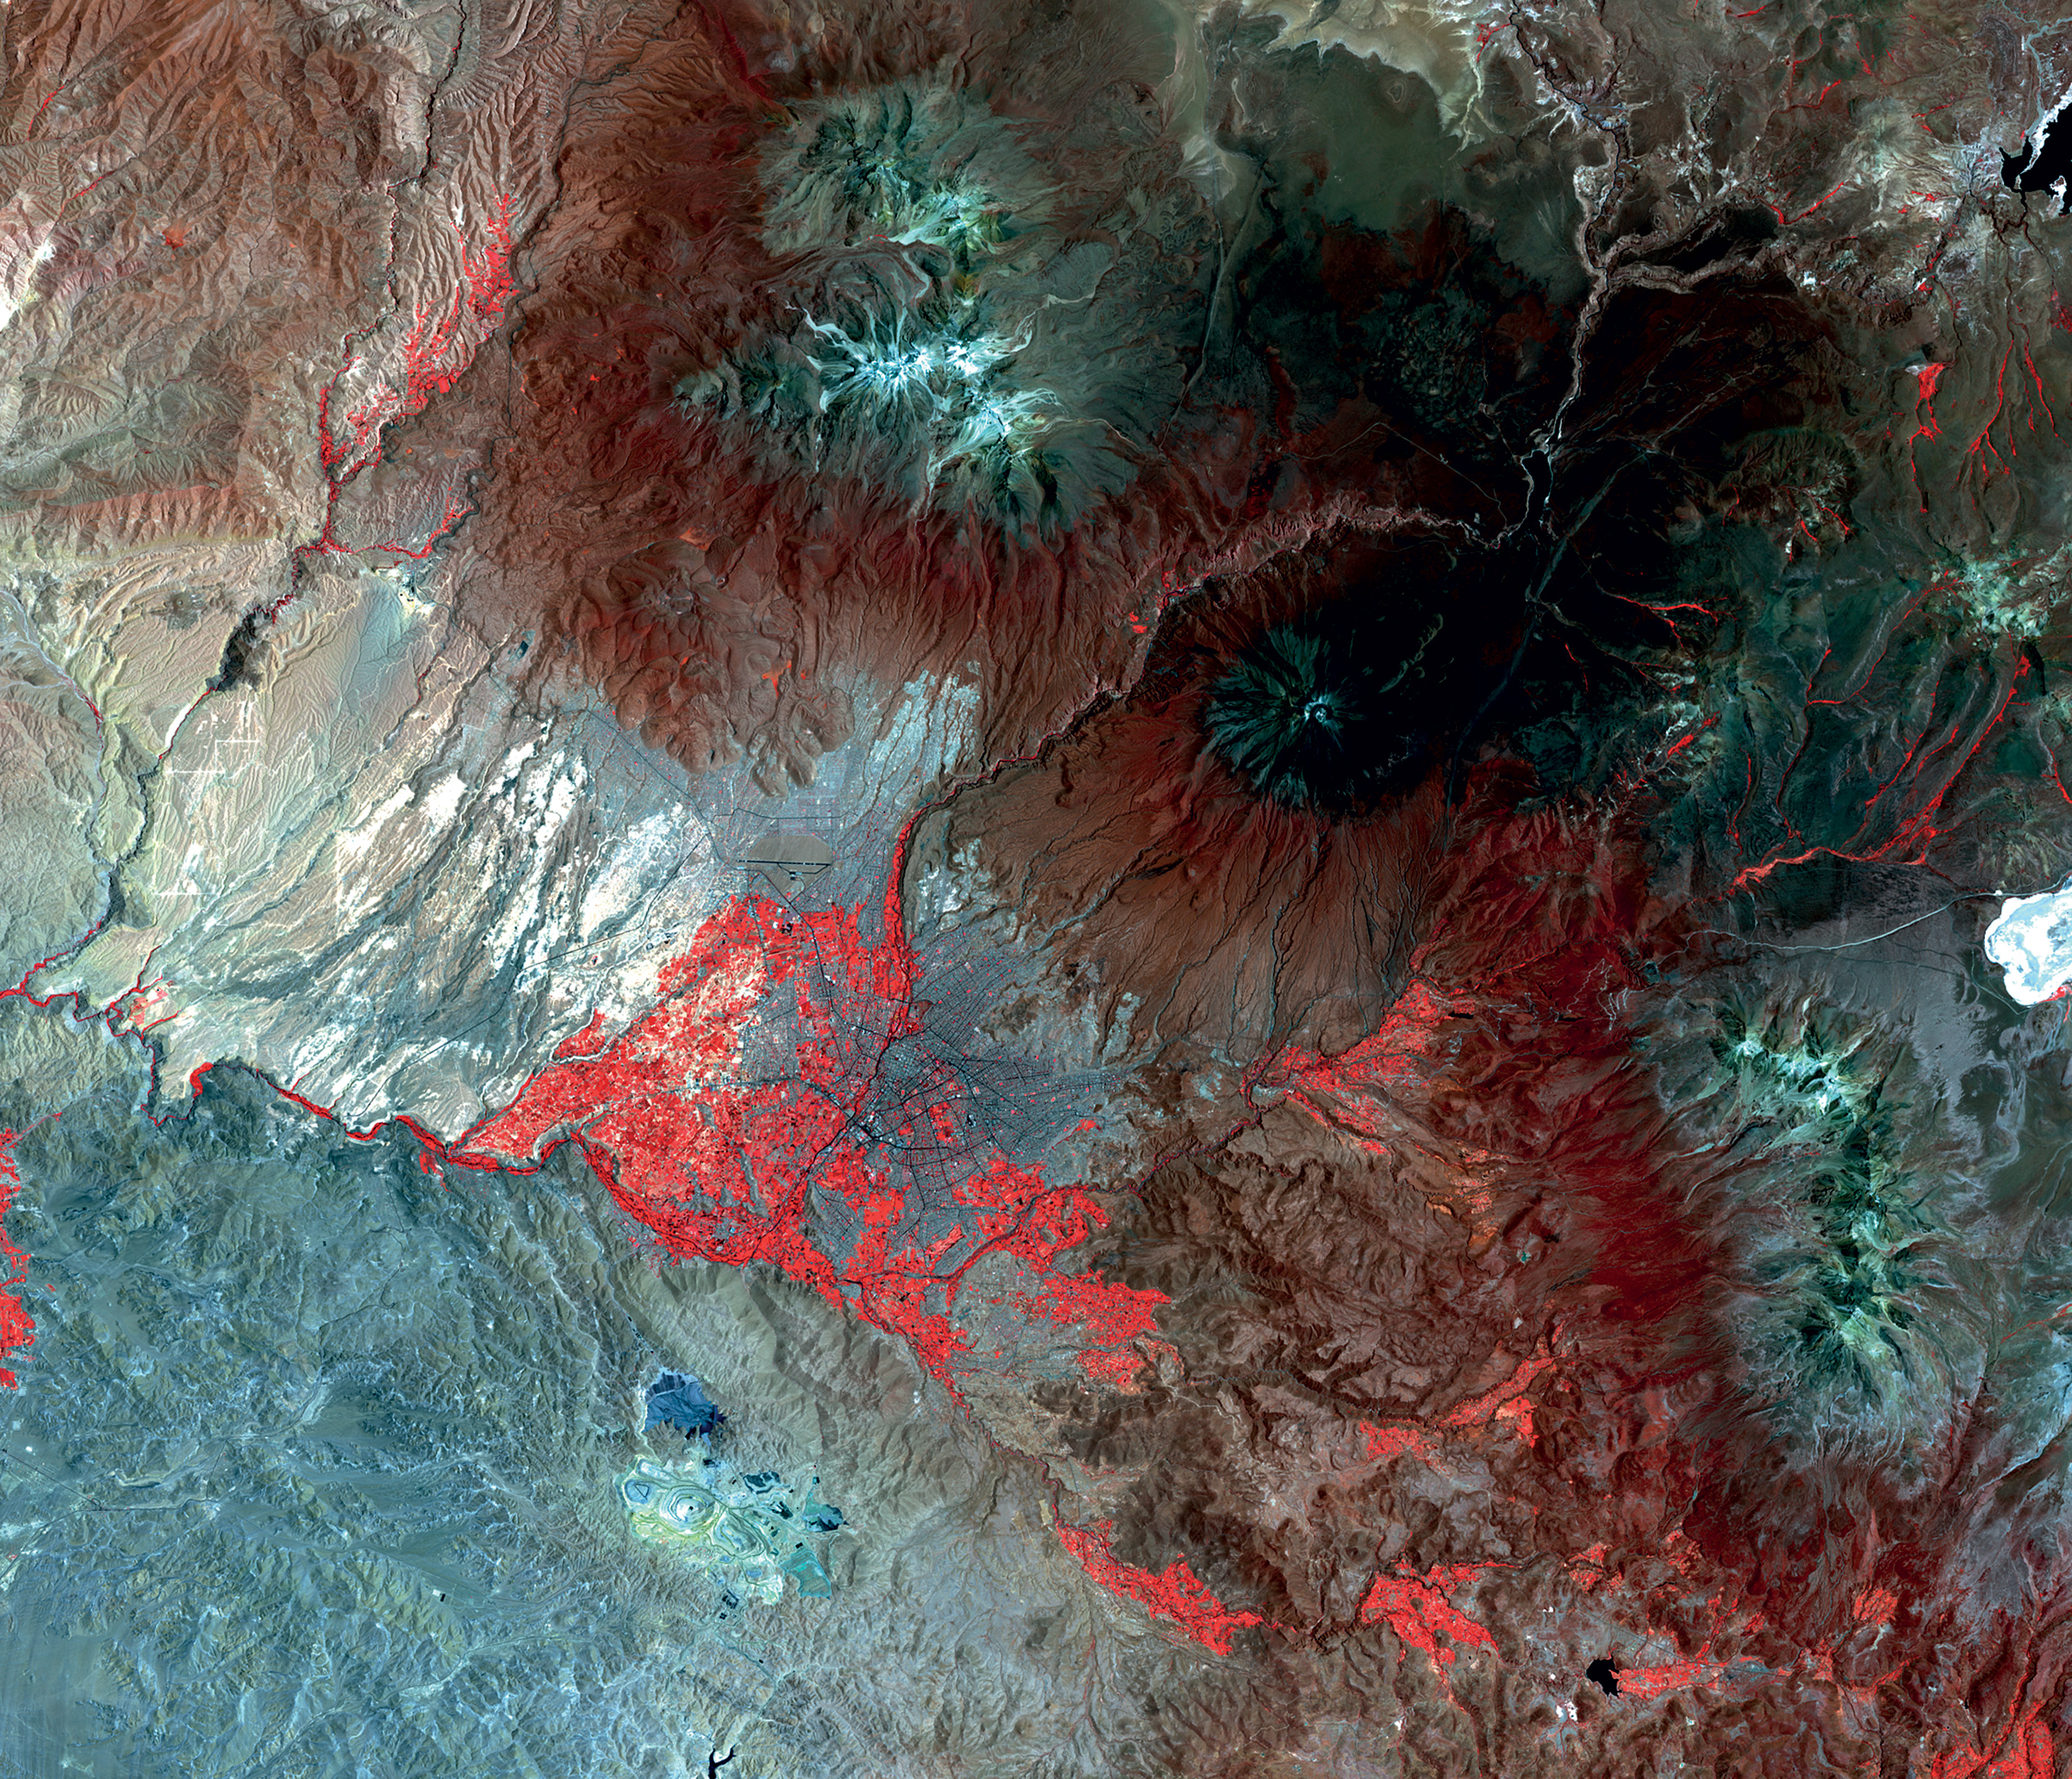 <strong>Arequipa, Peru</strong> <em>1:325,000</em> Mina Cerro Verde is an open-pit copper and molybdenum mine shown in blue in the bottom left of the image, just south of the city. The mine, which has a symbiotic relationship with the city, has been expanded in recent years and operates the city’s first wastewater treatment plant. (Landsat OLI/TIRS)